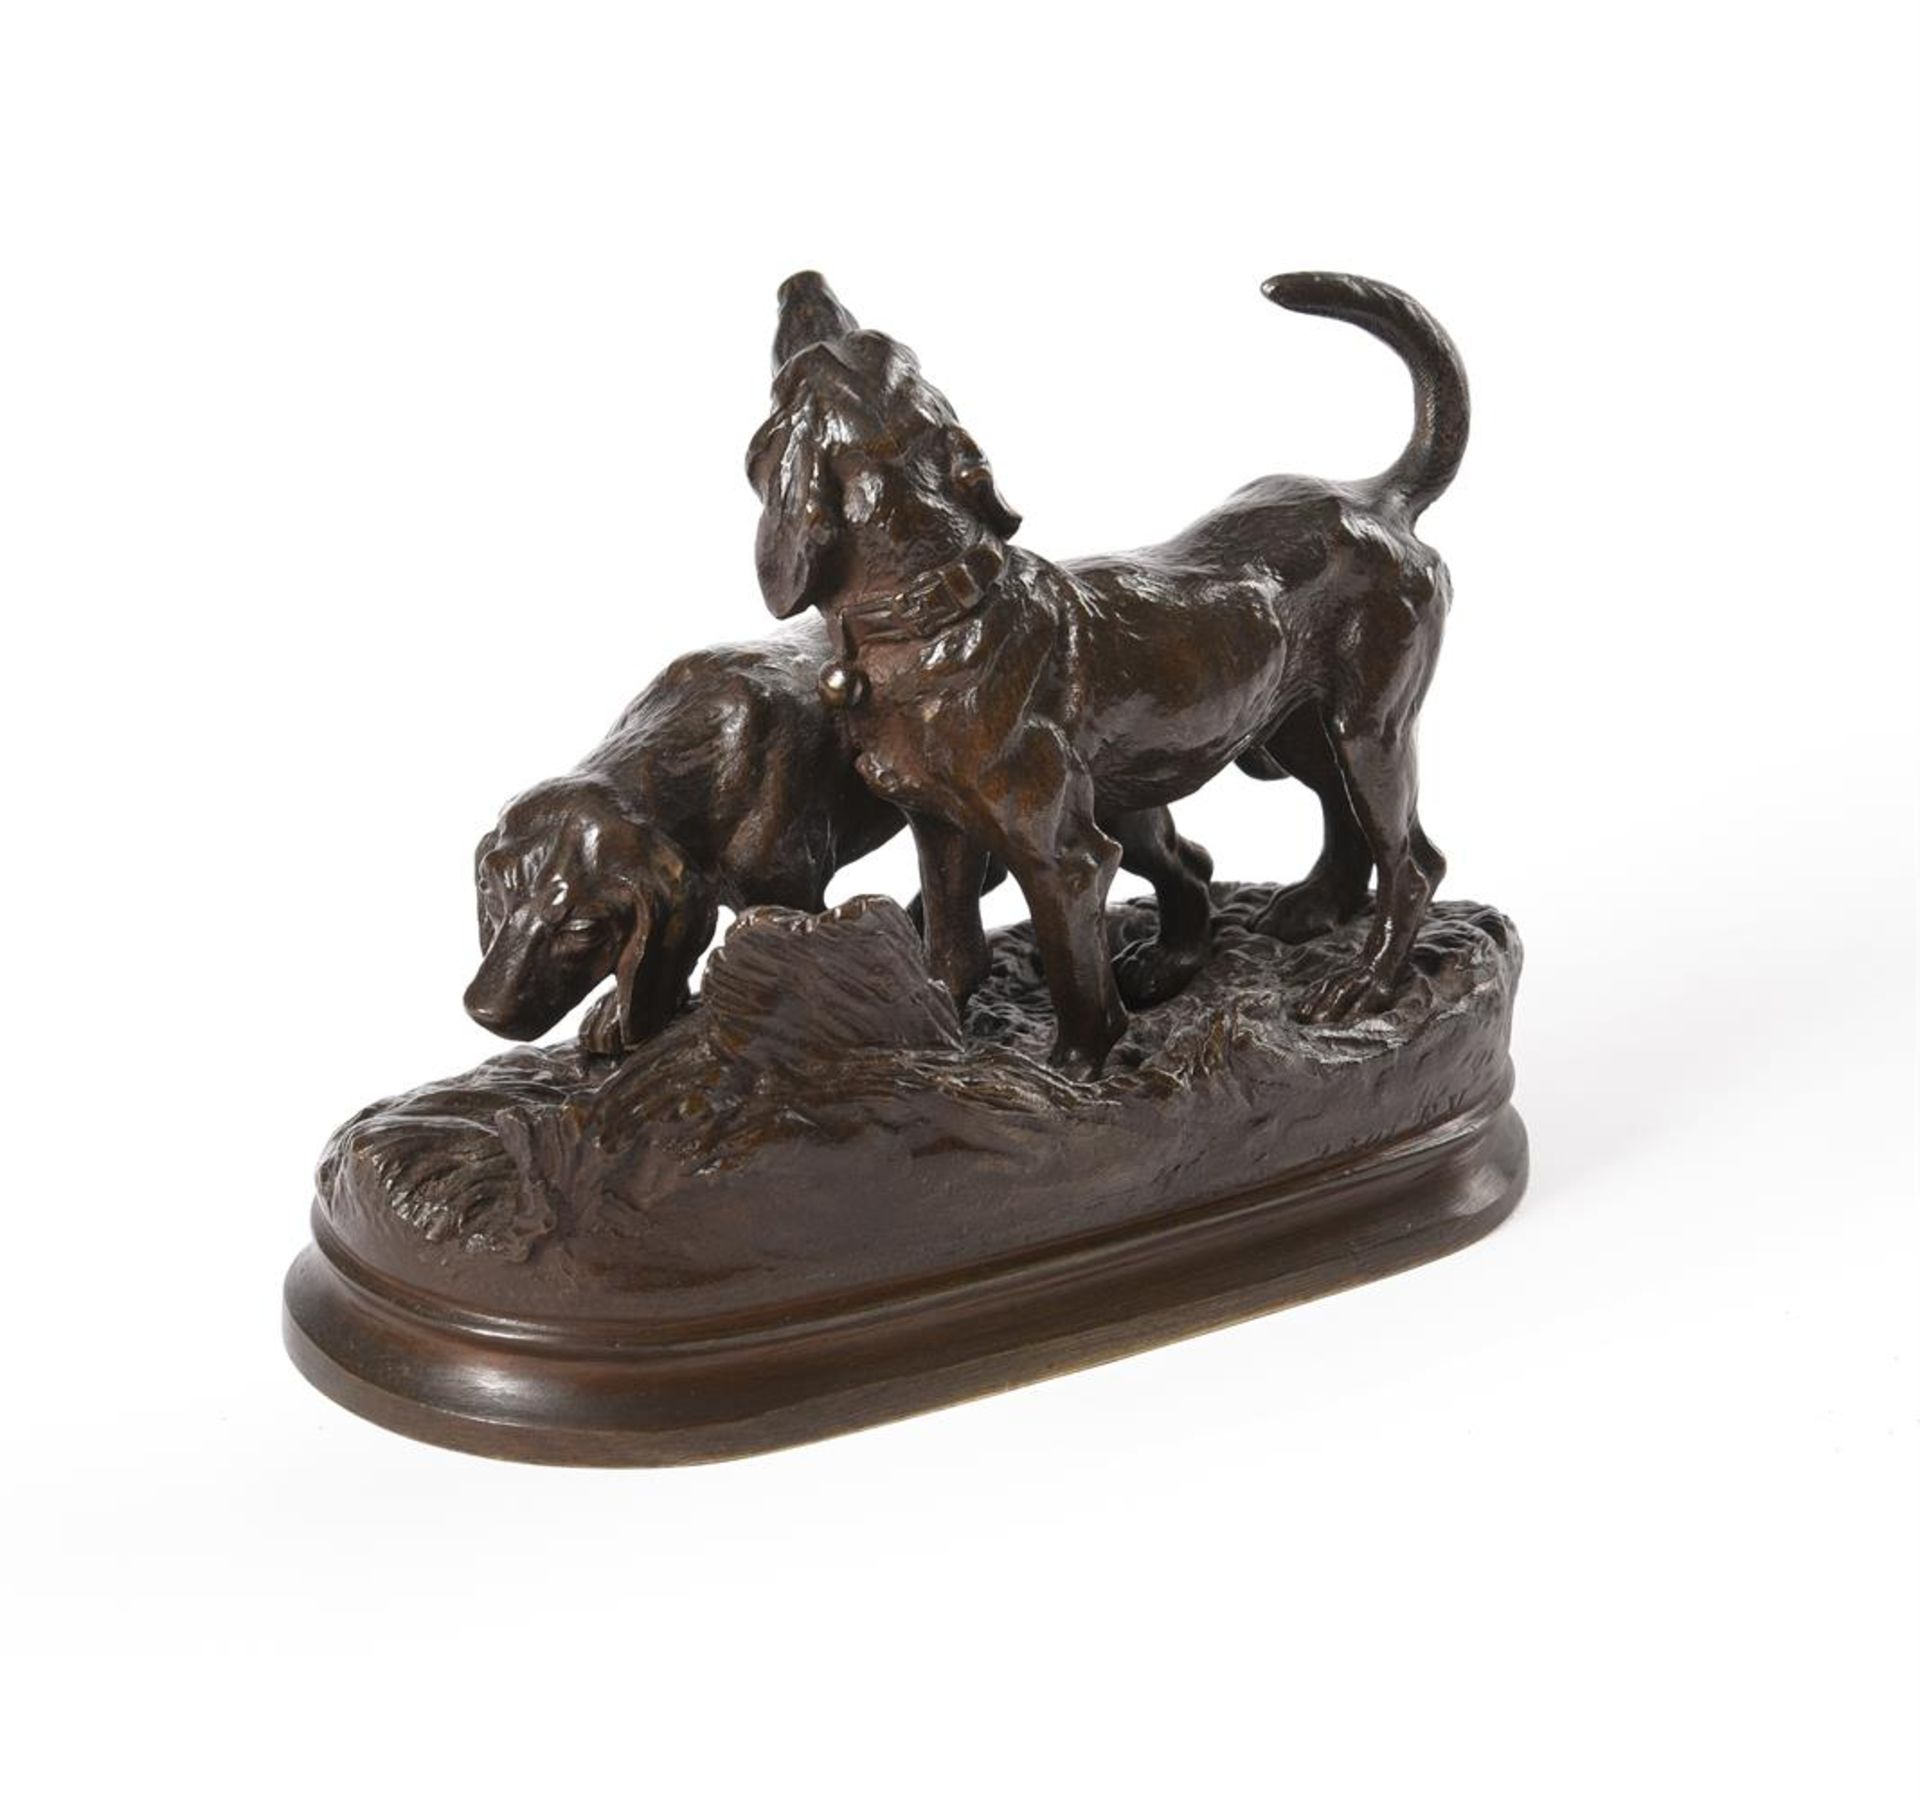 ALFRED DUBUCAND (FRENCH, 1828-1894), A BRONZE ANIMALIER DOG GROUP, LATE 19TH CENTURY - Image 2 of 3